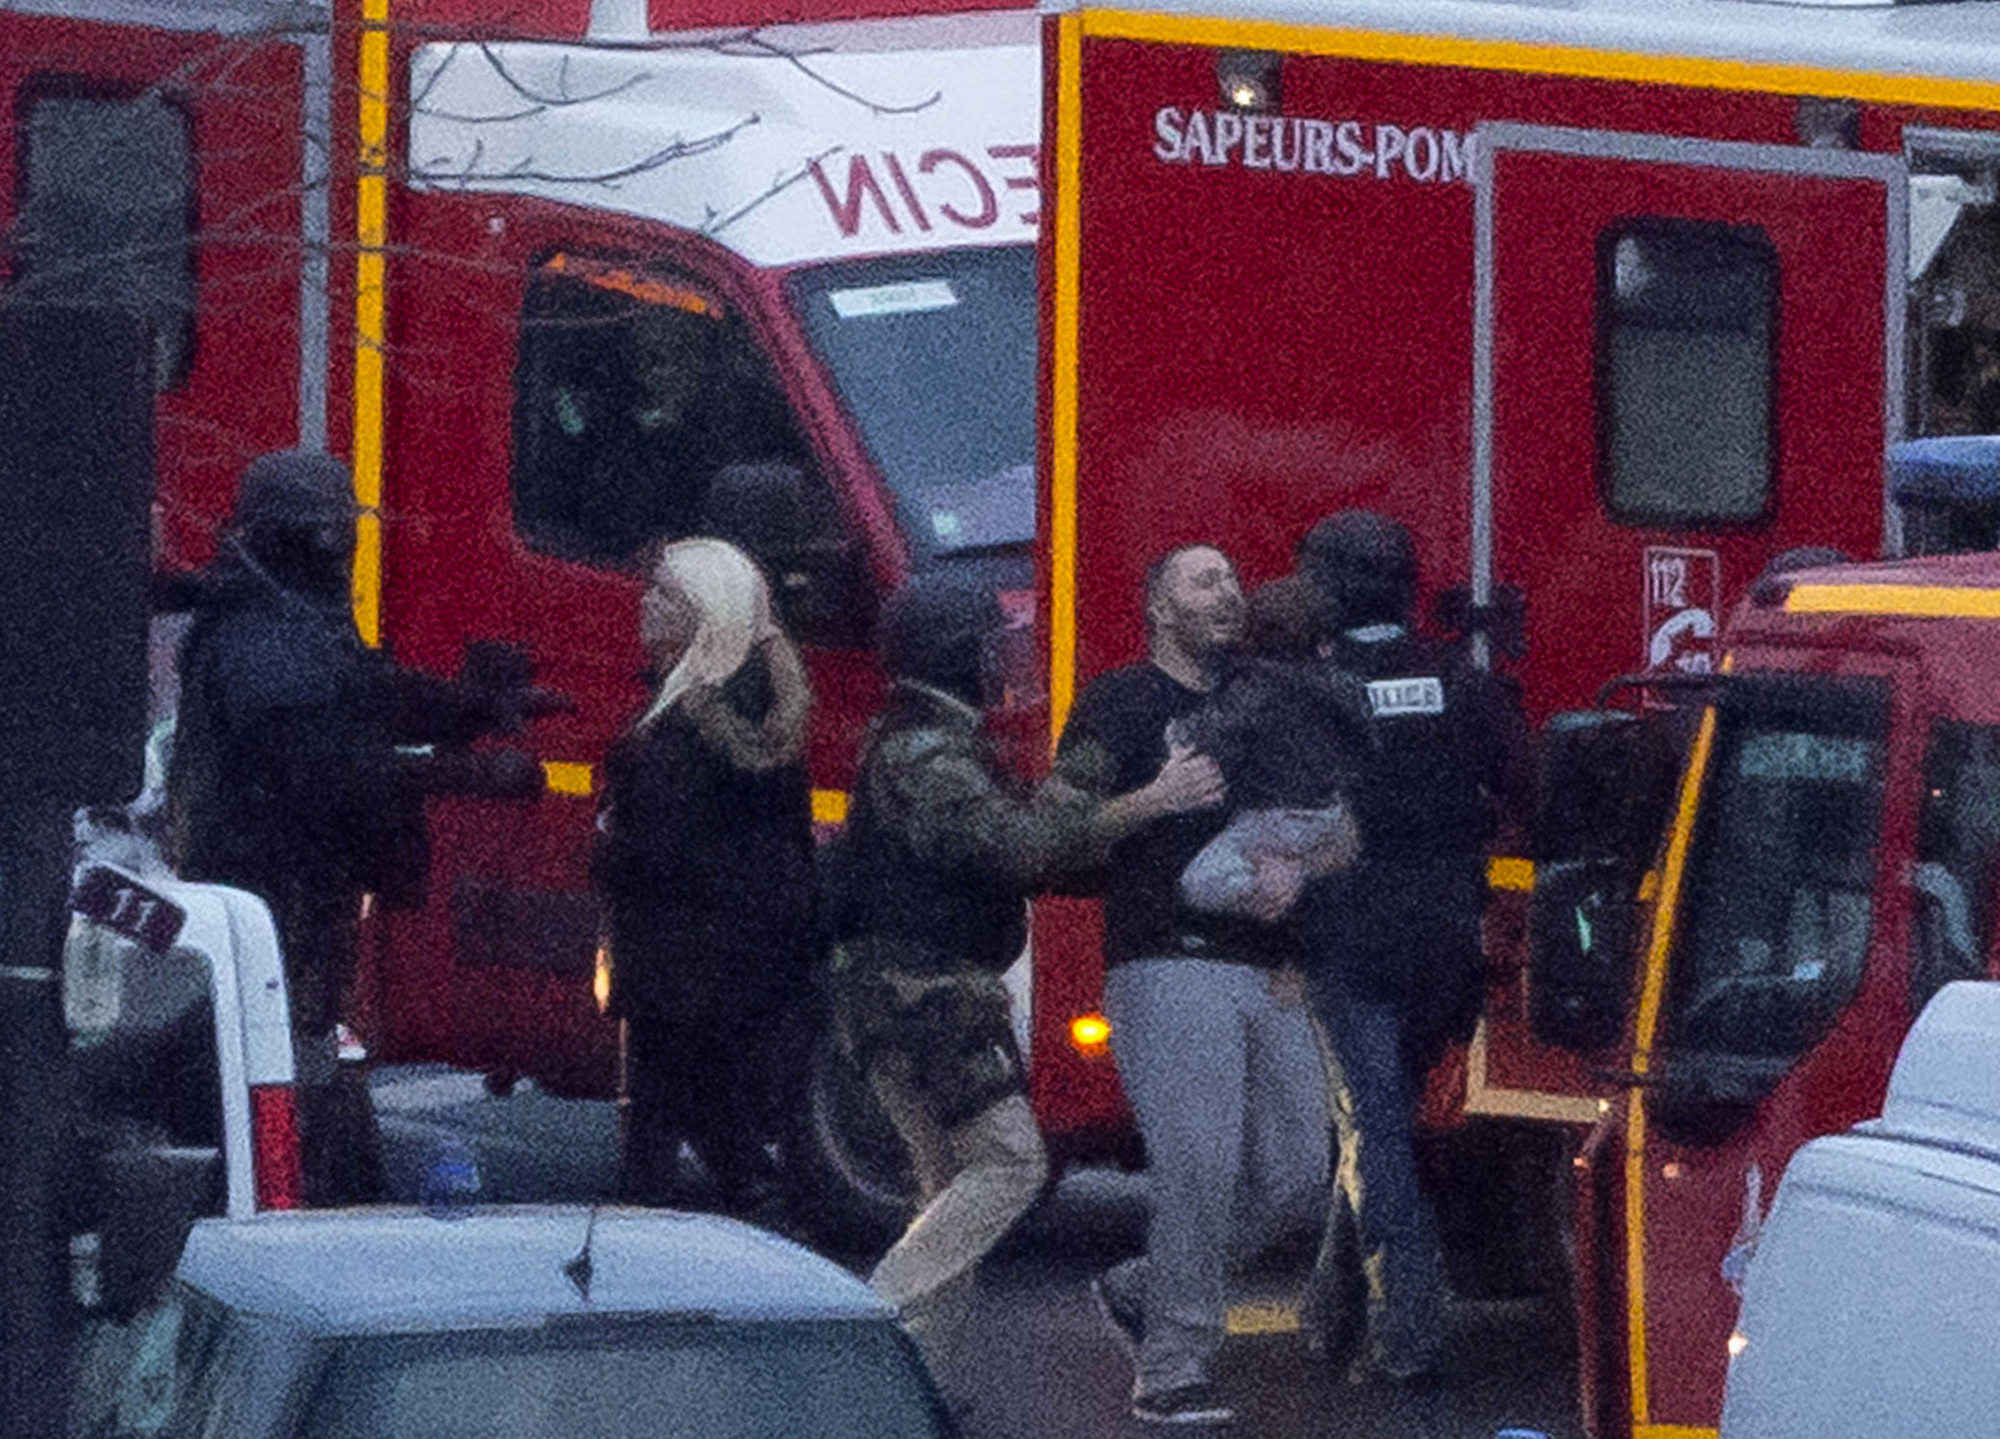 This is a Friday, Jan. 9, 2015 file photo of a security officer directs released hostages after they stormed a kosher market to end a hostage situation, Paris. Explosions and gunshots were heard as police forces stormed a kosher grocery in Paris where a gunman was holding at least five people hostage. At the kosher supermarket in Paris, a quick-thinking Muslim employee hides several Jewish shoppers in the basement before sneaking out to brief police on the hostage-taker upstairs. (AP Photo/Michel Euler, File) (Michel Euler—AP)